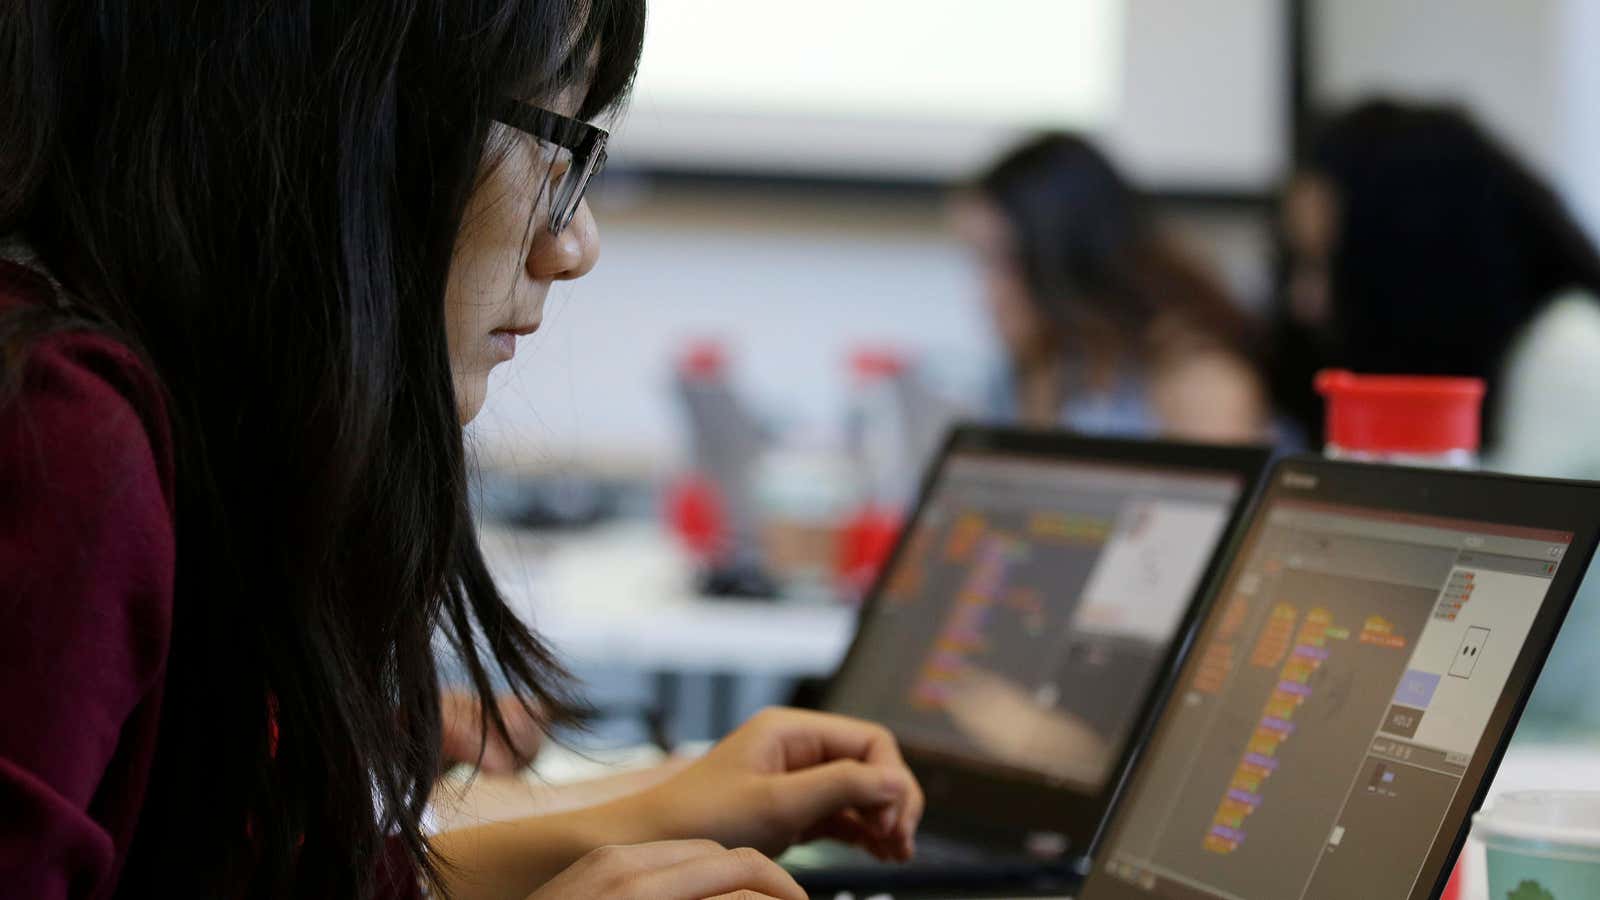 Encouraging girls to study software is part of Adobe’s long-term inclusion and pay parity strategy.